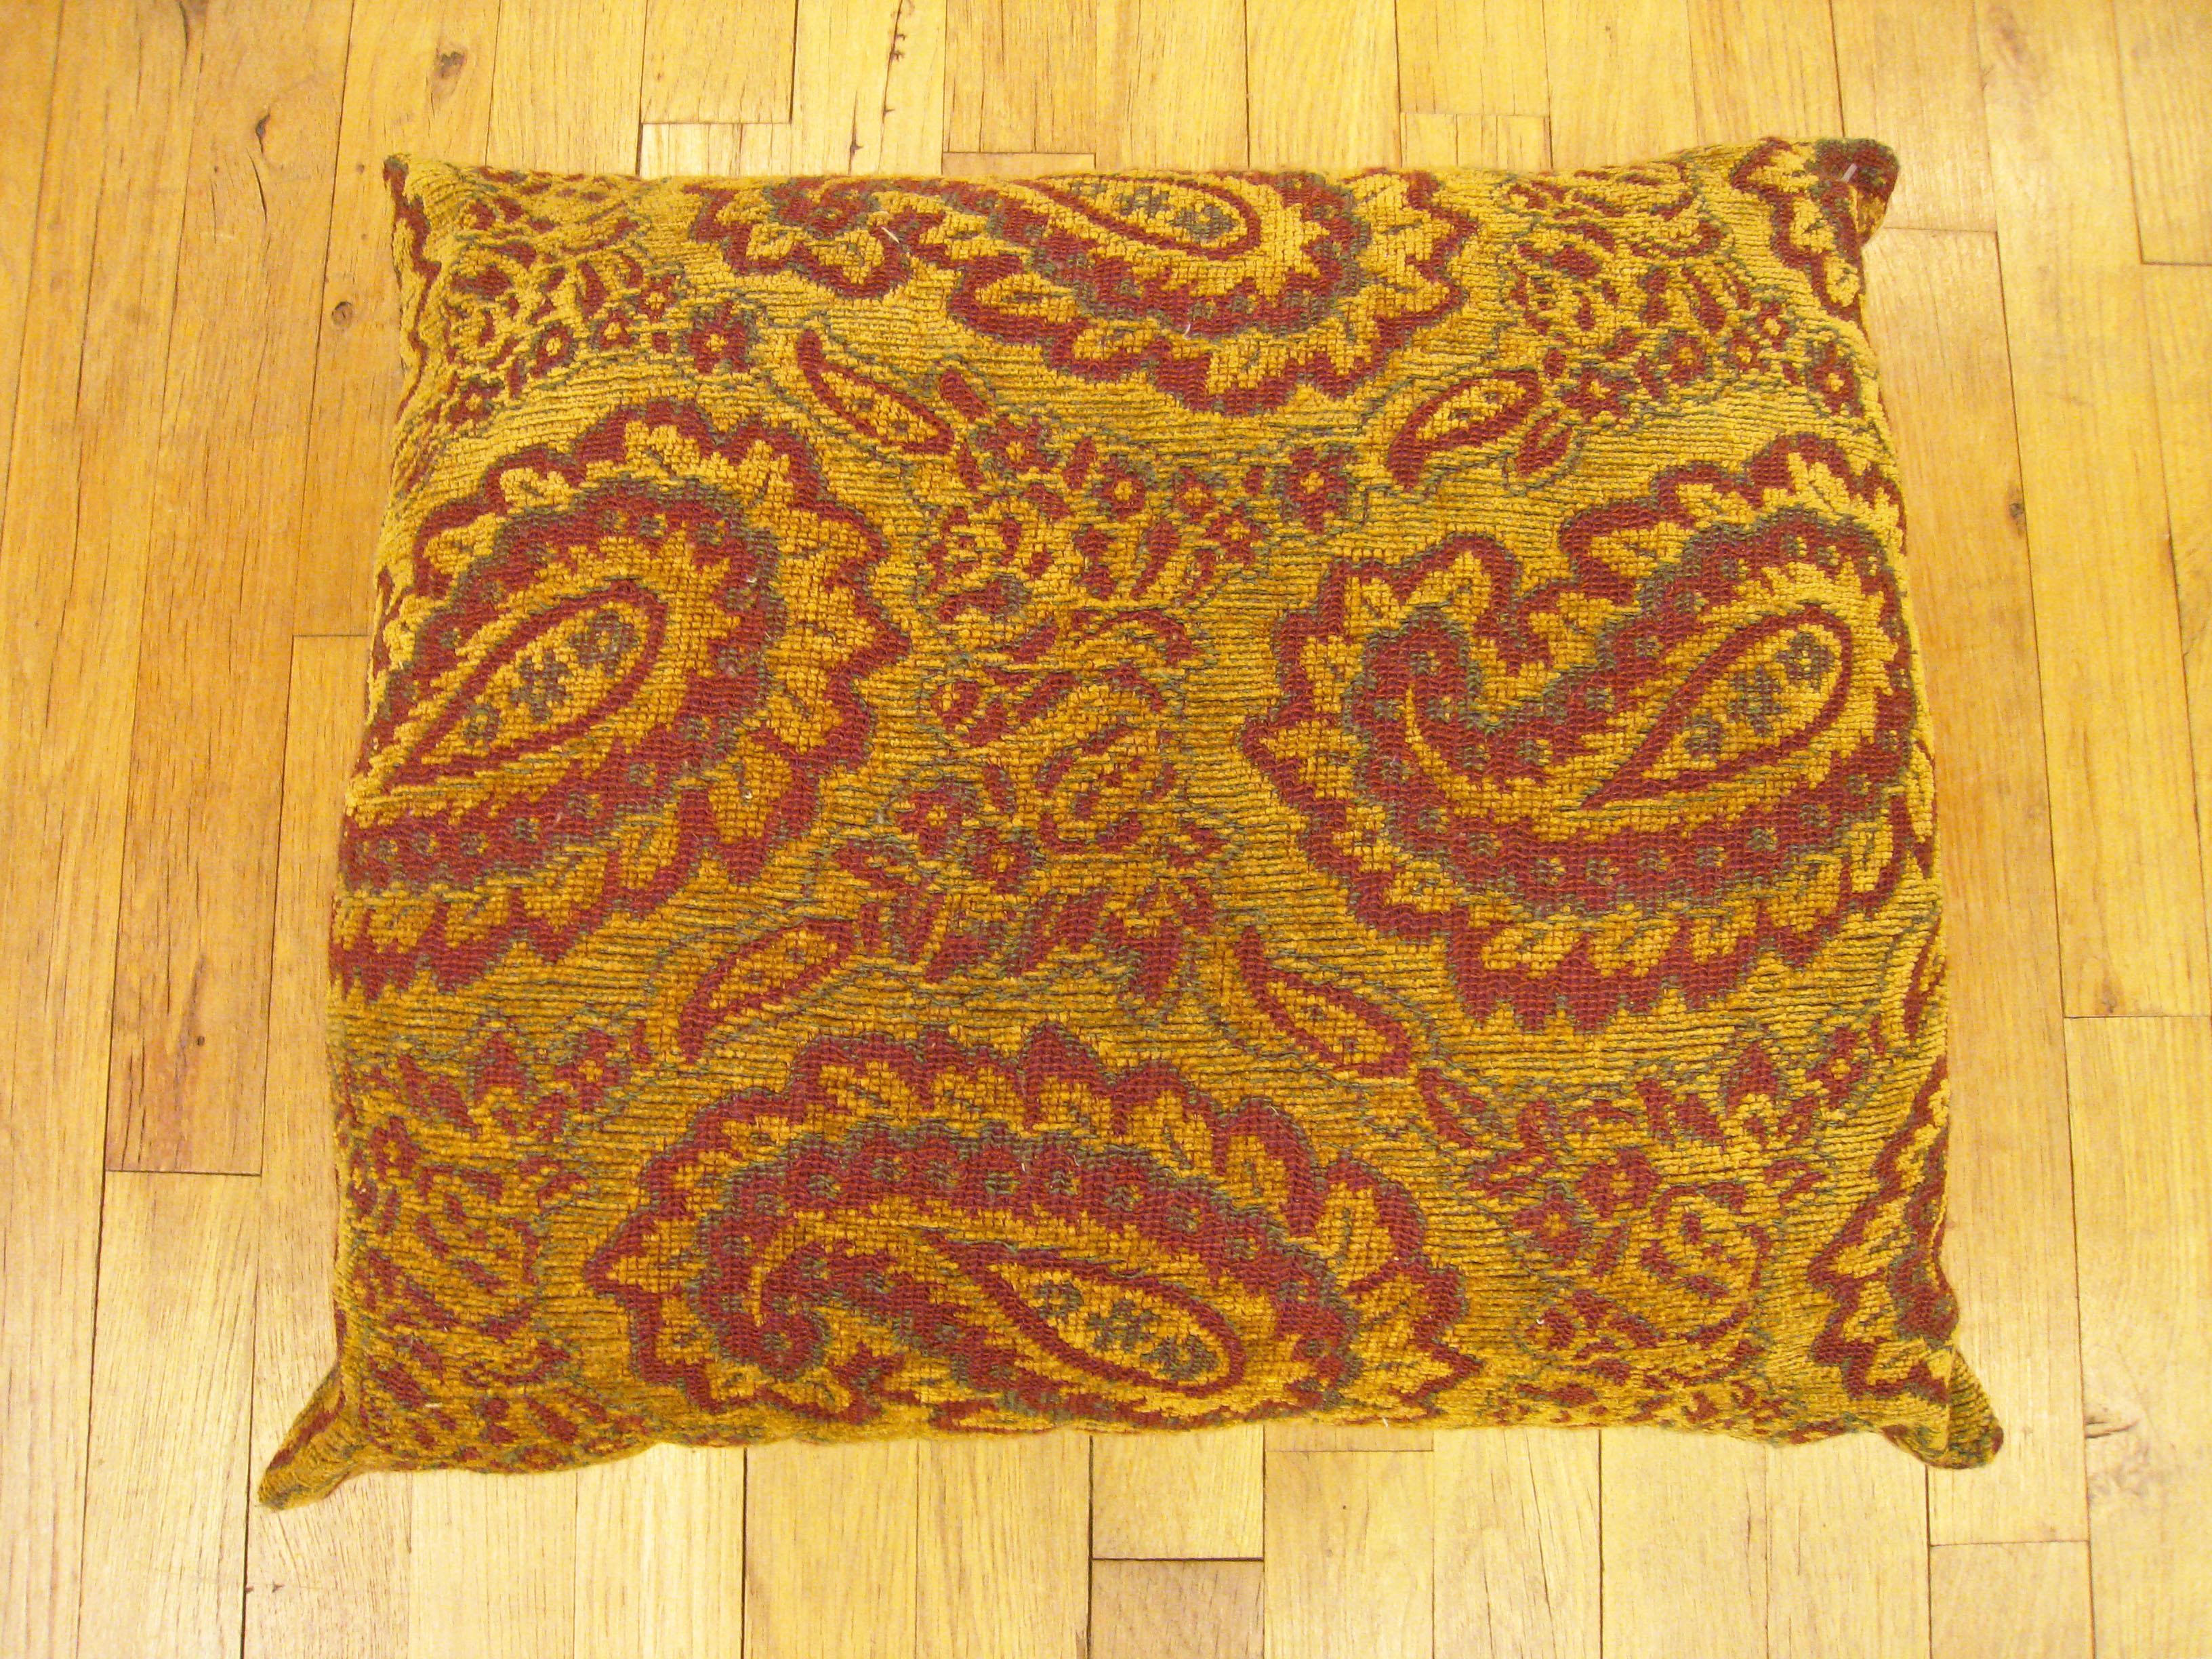 North American Vintage Tapestry Pillows with Large Paisley Designs For Sale